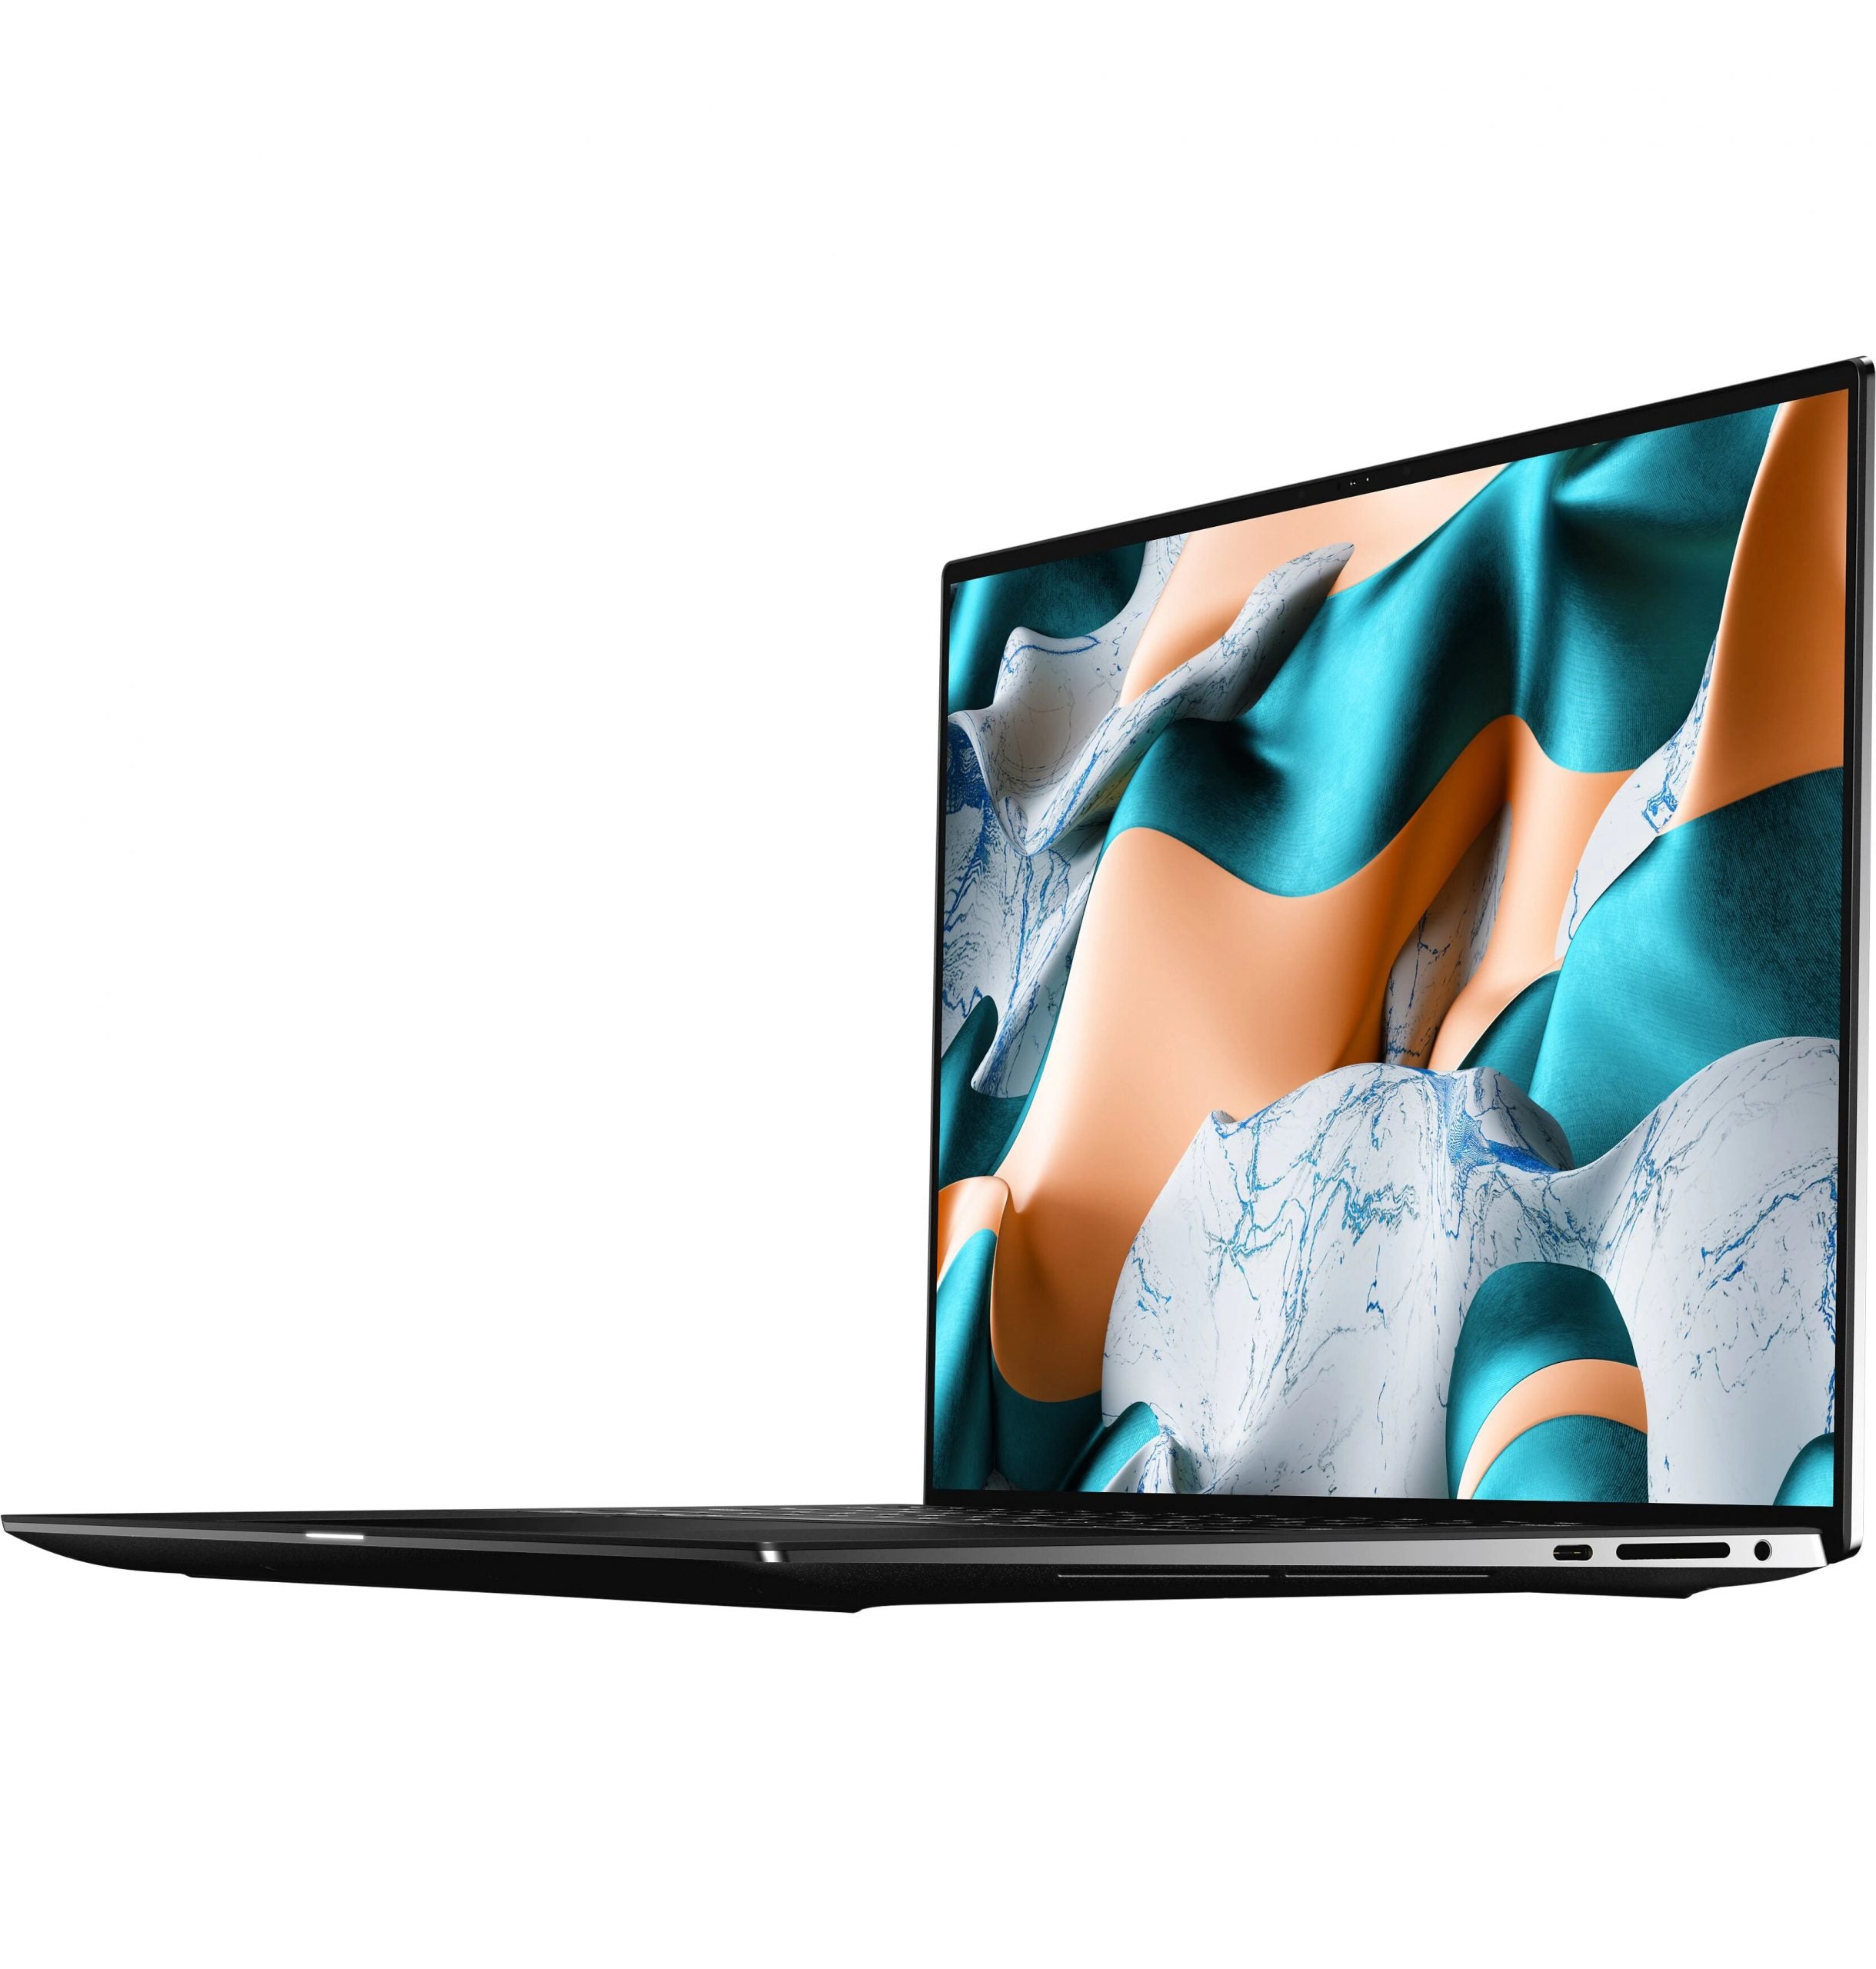 DELL XPS 15 9500 Workstation and gaming notebook 15.6″ Inch 4K | Intel Core i7-10750H 2.6Ghz | Ram 32Gb DDR4 | SSD 1Tb | Nvidia GTX 1650Ti 4Gb | Windows 10 Pro